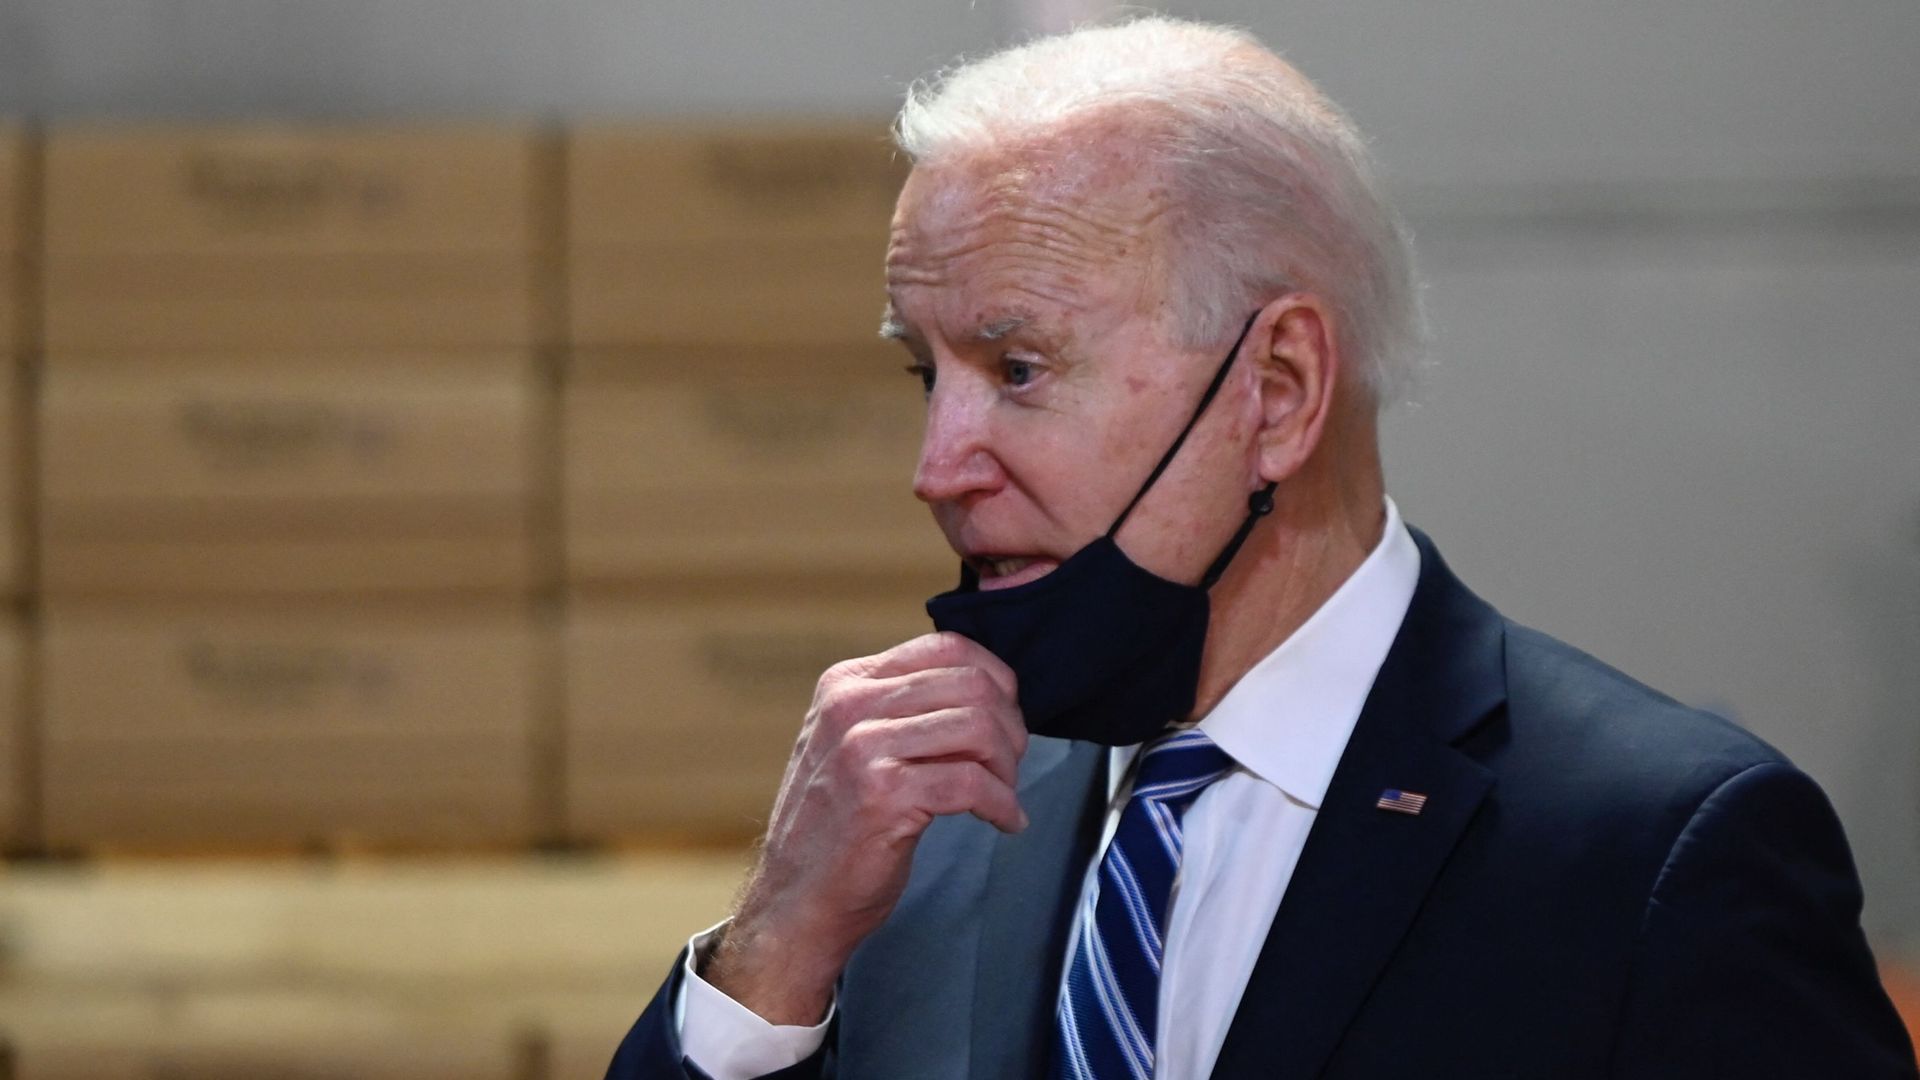 Biden wears a face mask and a suit while talking